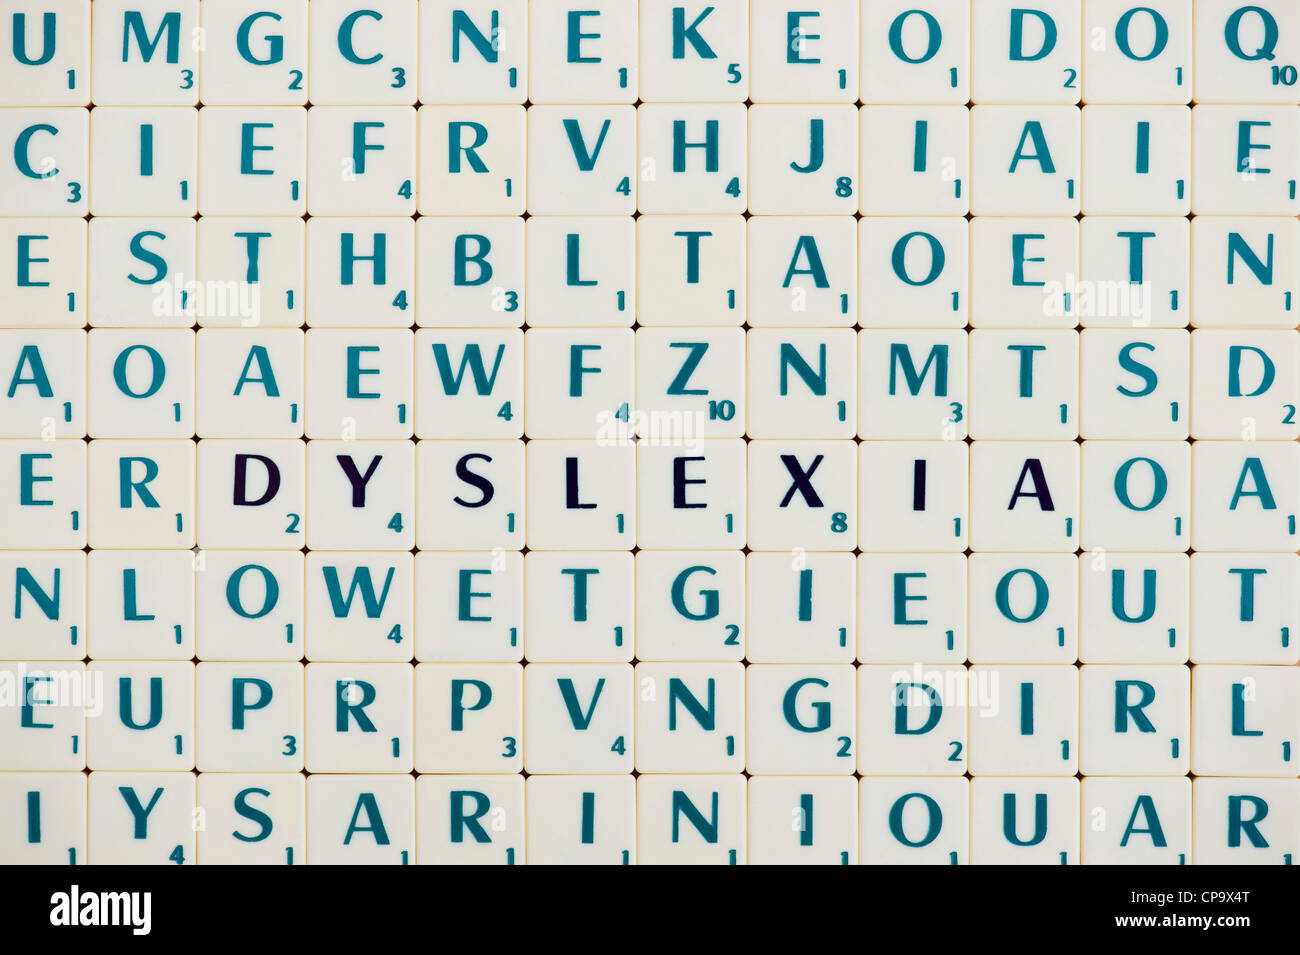 Scrabble letters with the word Dyslexia highlighted Stock Photo